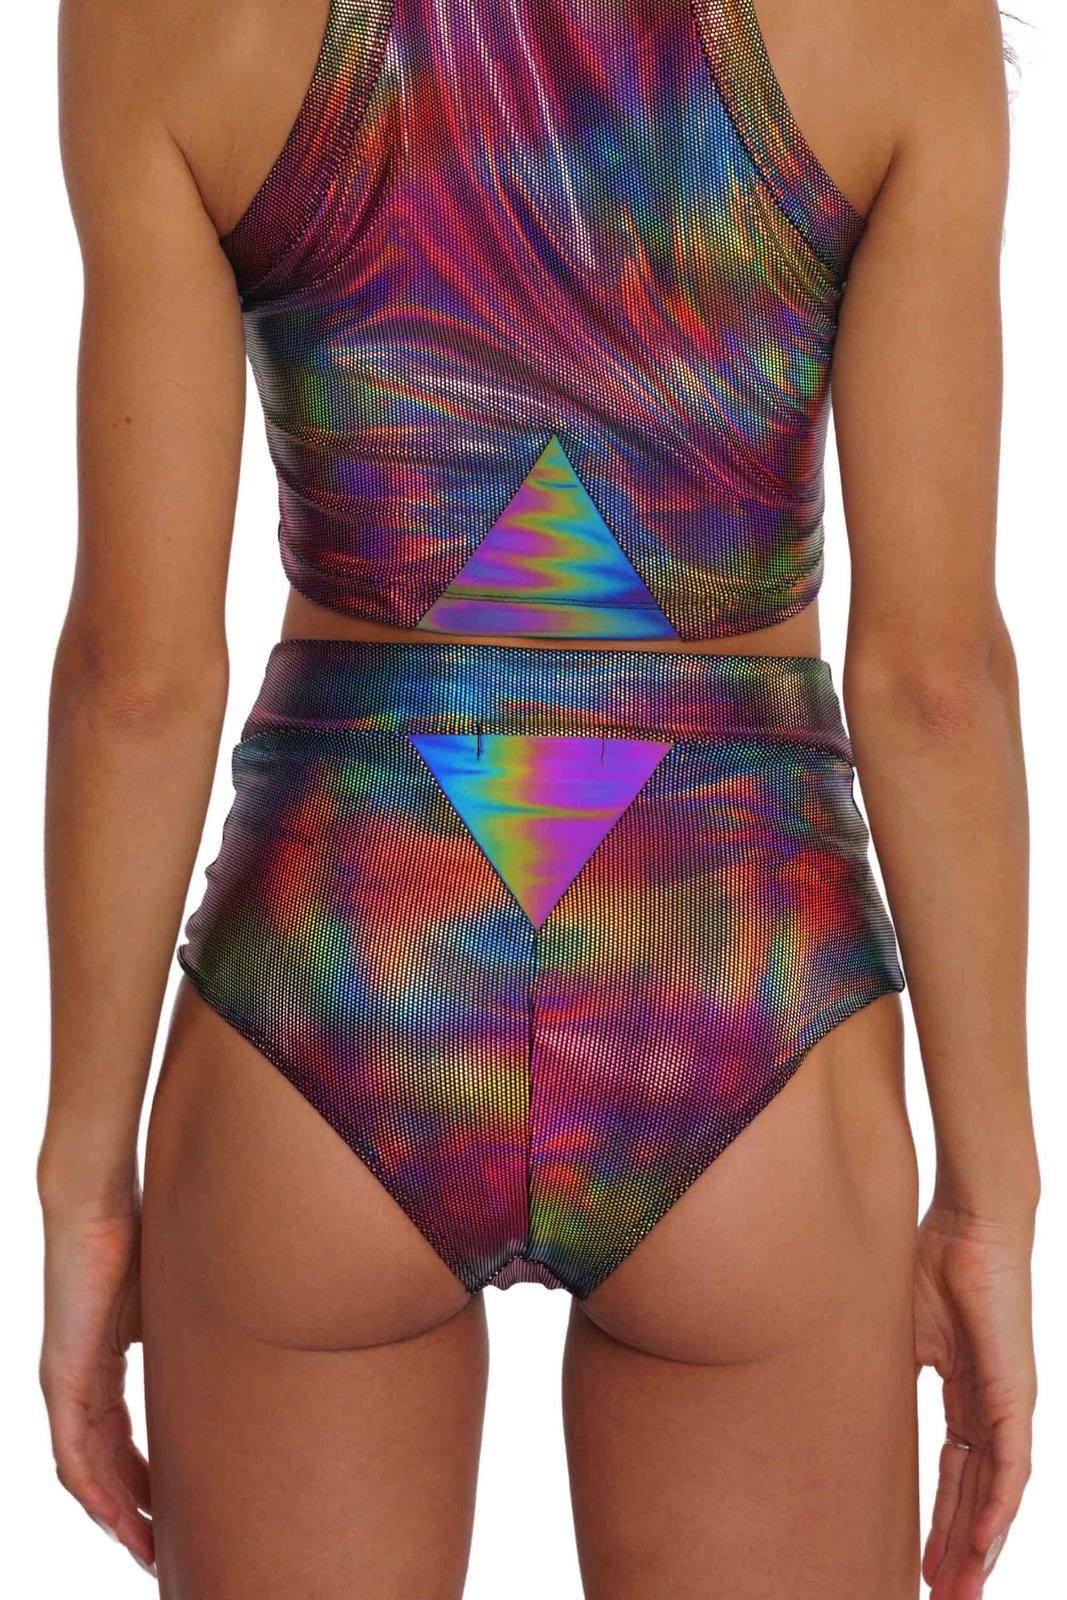 High waisted hot pants in rainbow techno color spandex with reflective panels from Love Khaos